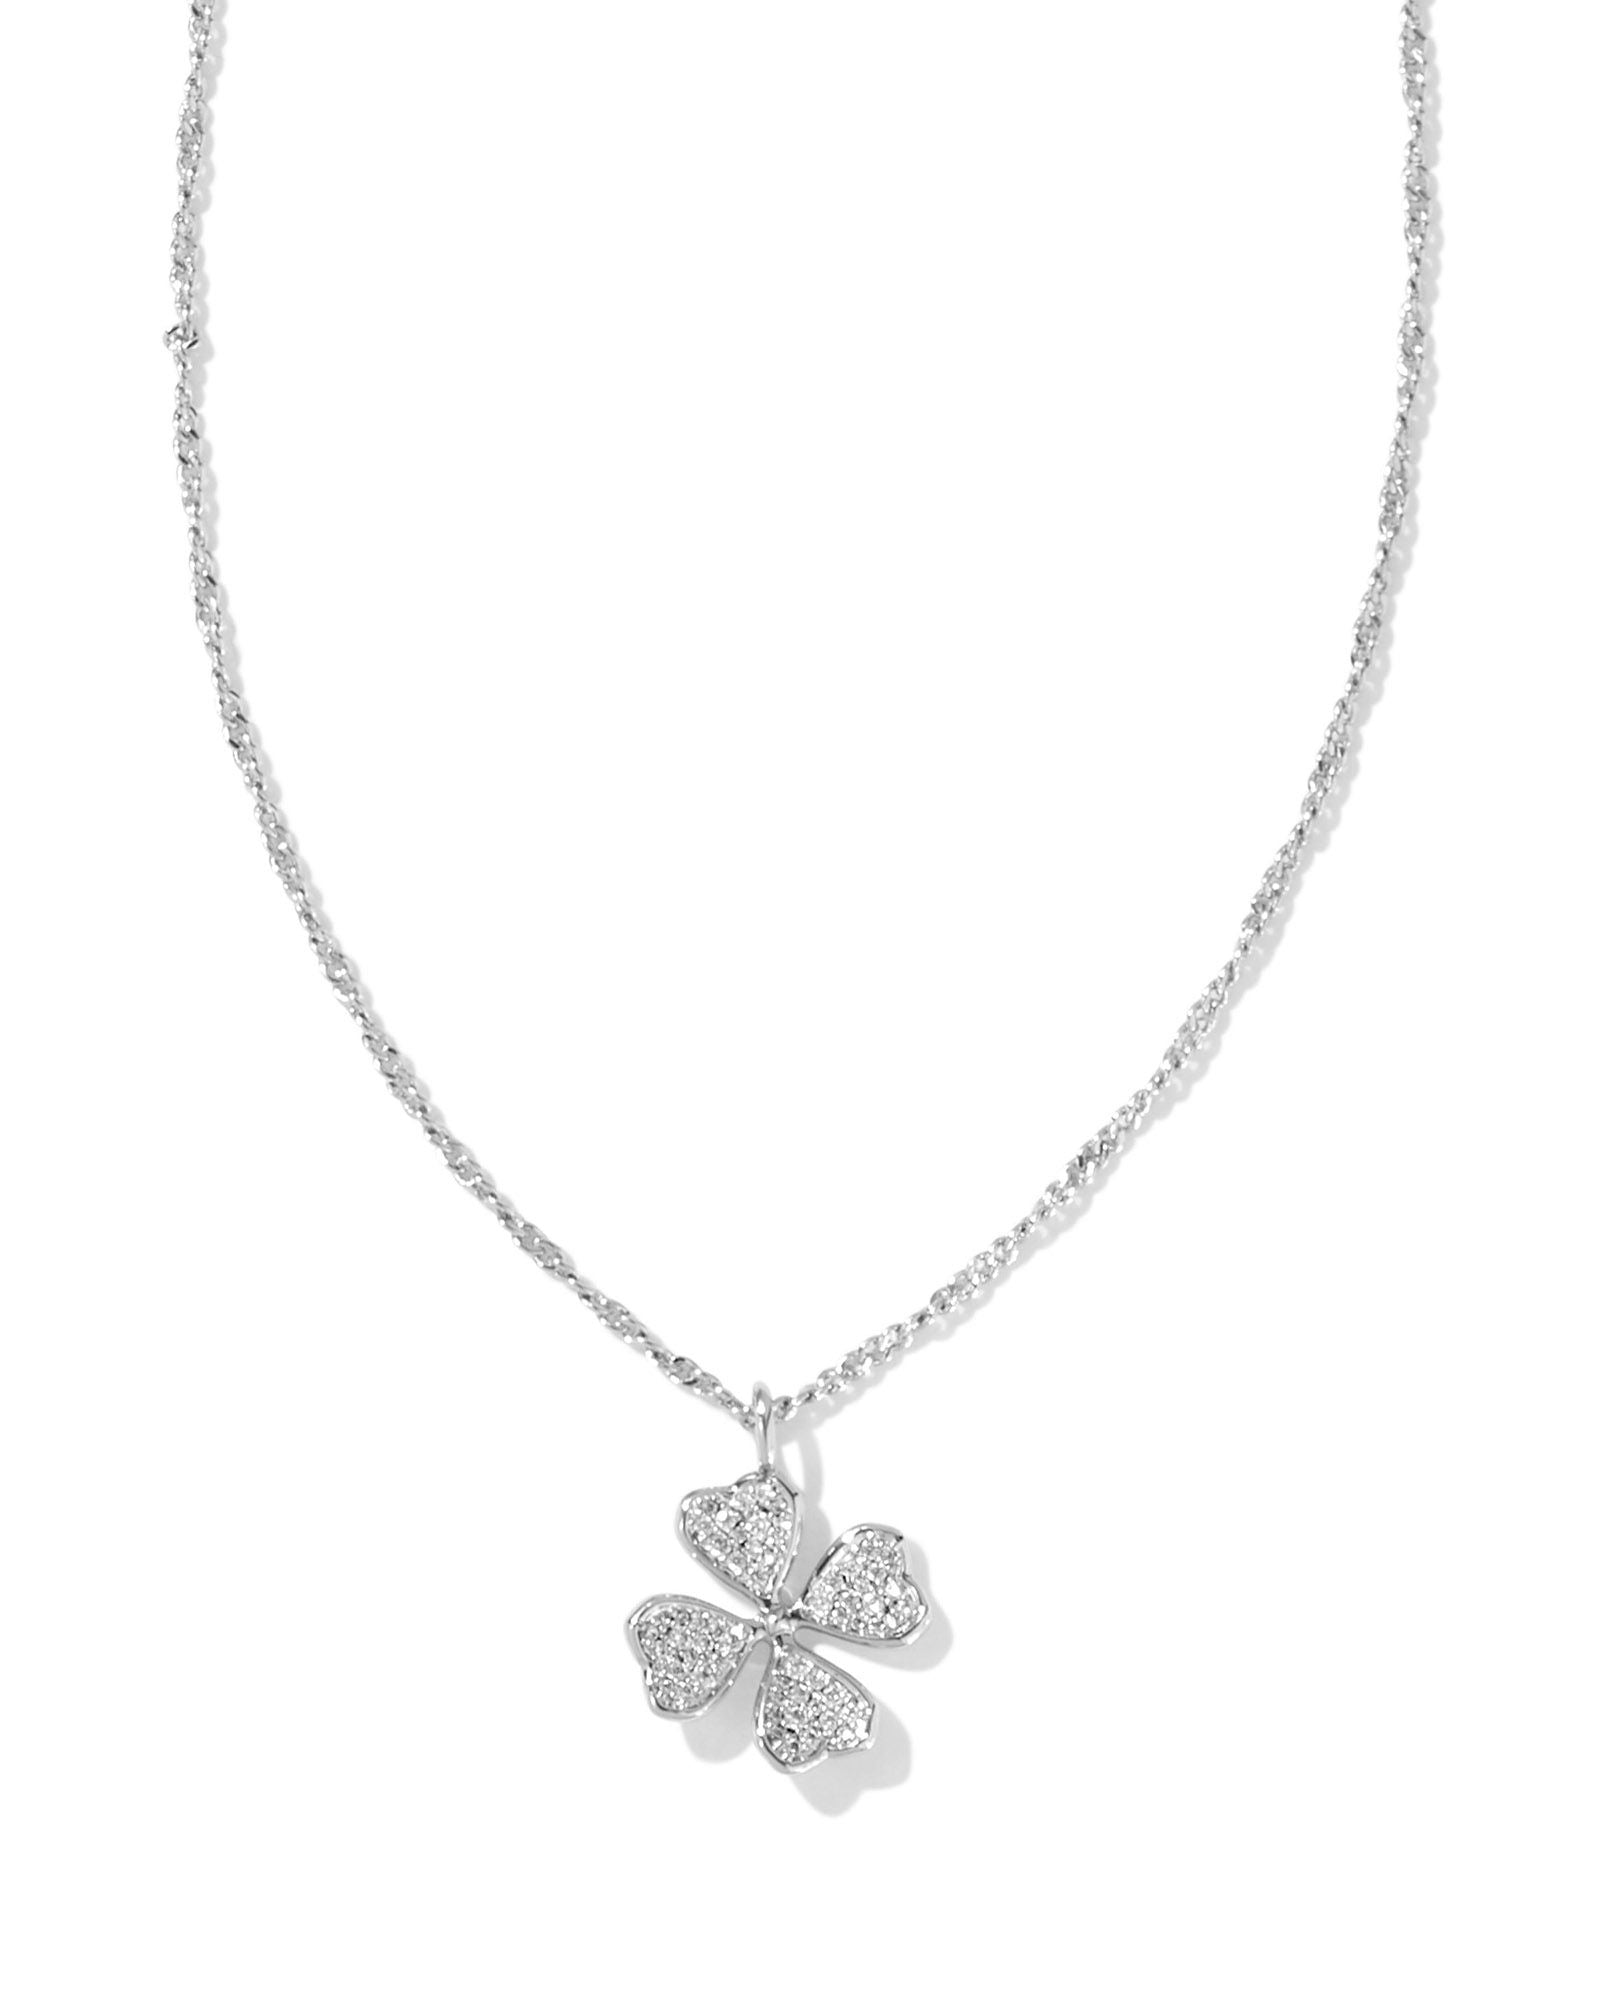 Clover Crystal Pendant Necklace Silver White Crystals